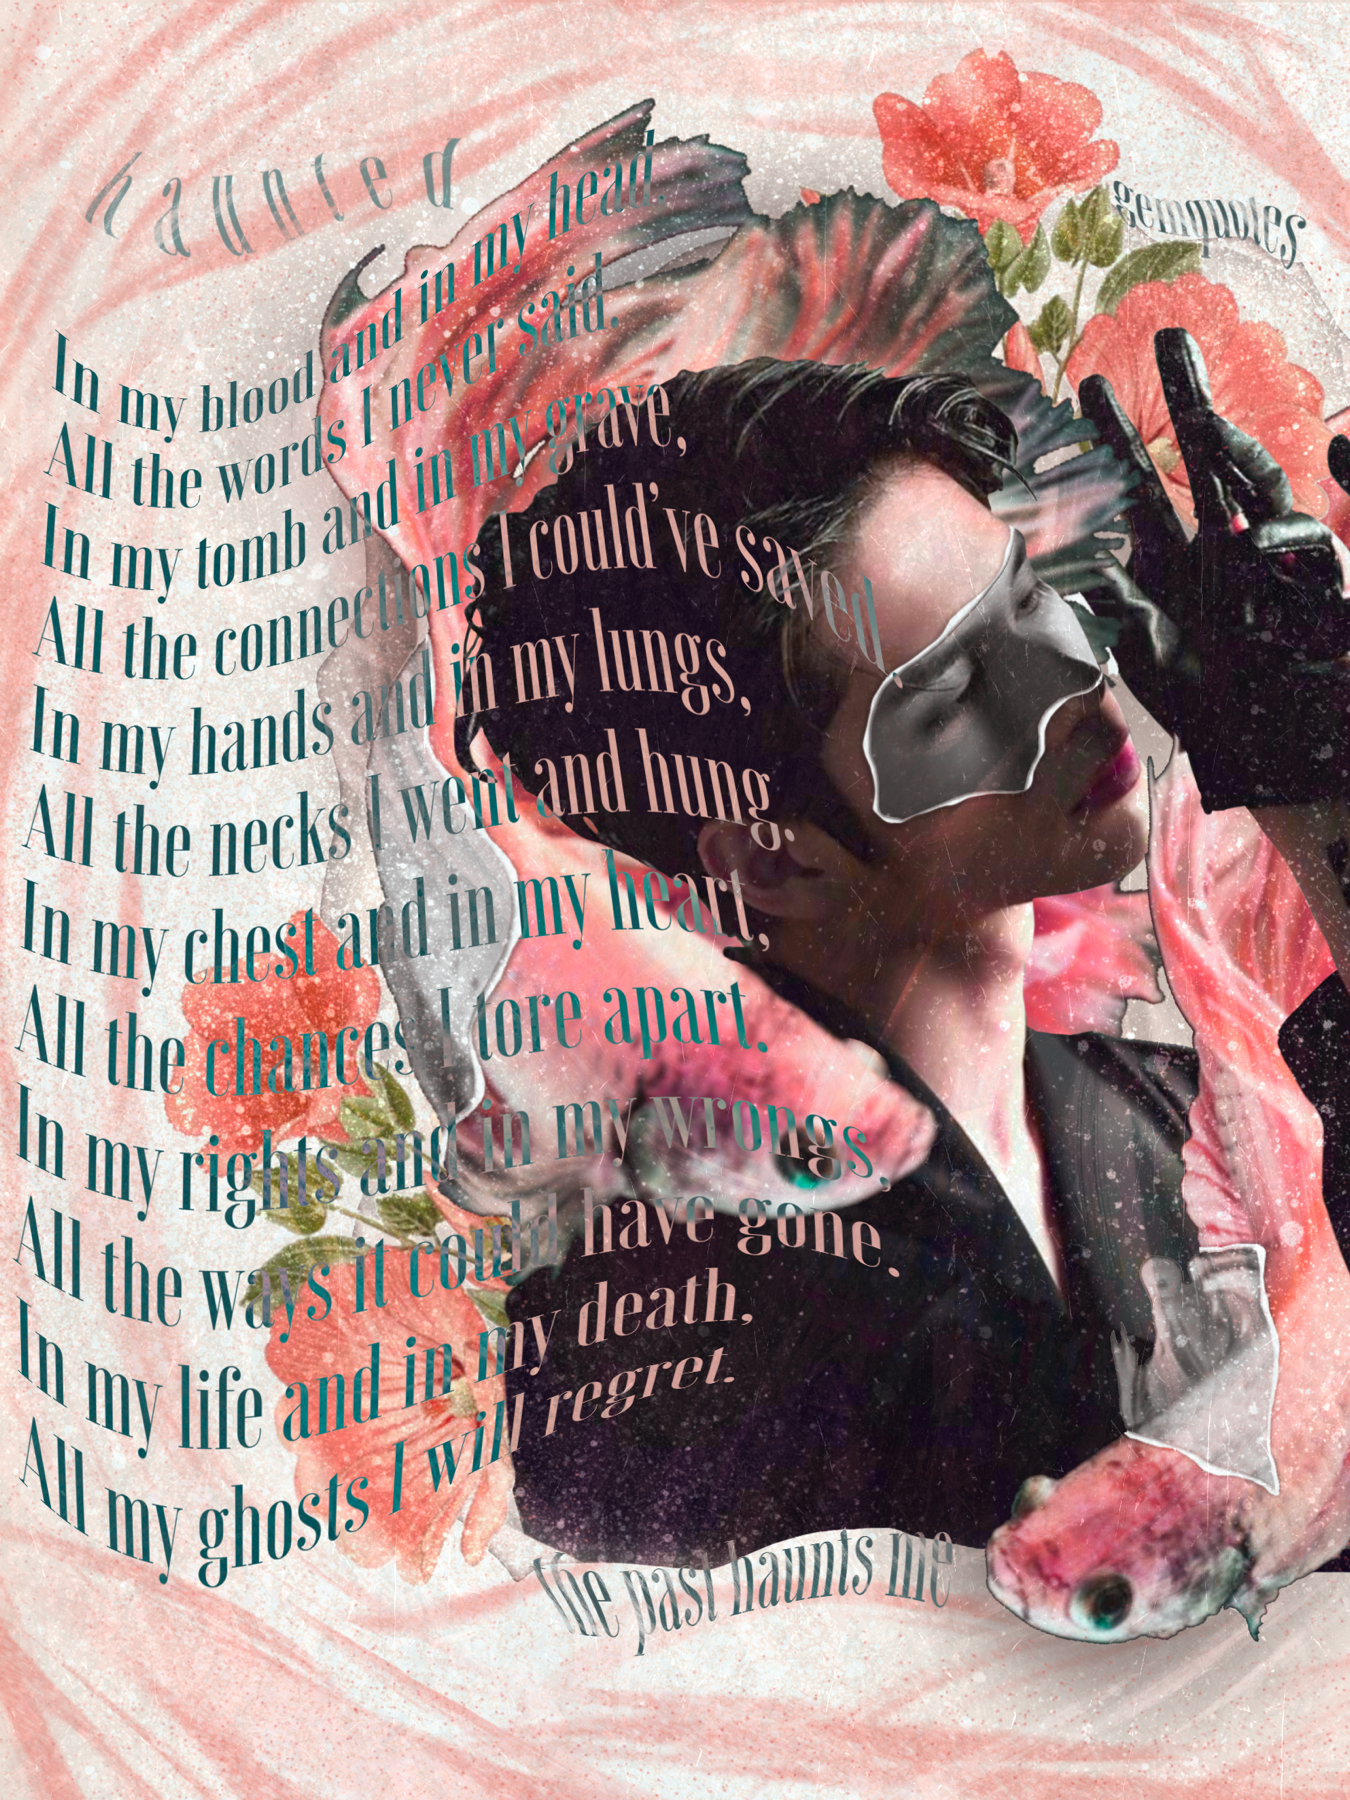 “XtapX”
(Poem by me) So my PC is bugging with my followers/following numbers?? Does anyone know if that’s grounds for panic? Also ik this collage is messy with the weird word placing/color and all, so forgive me😭~💗